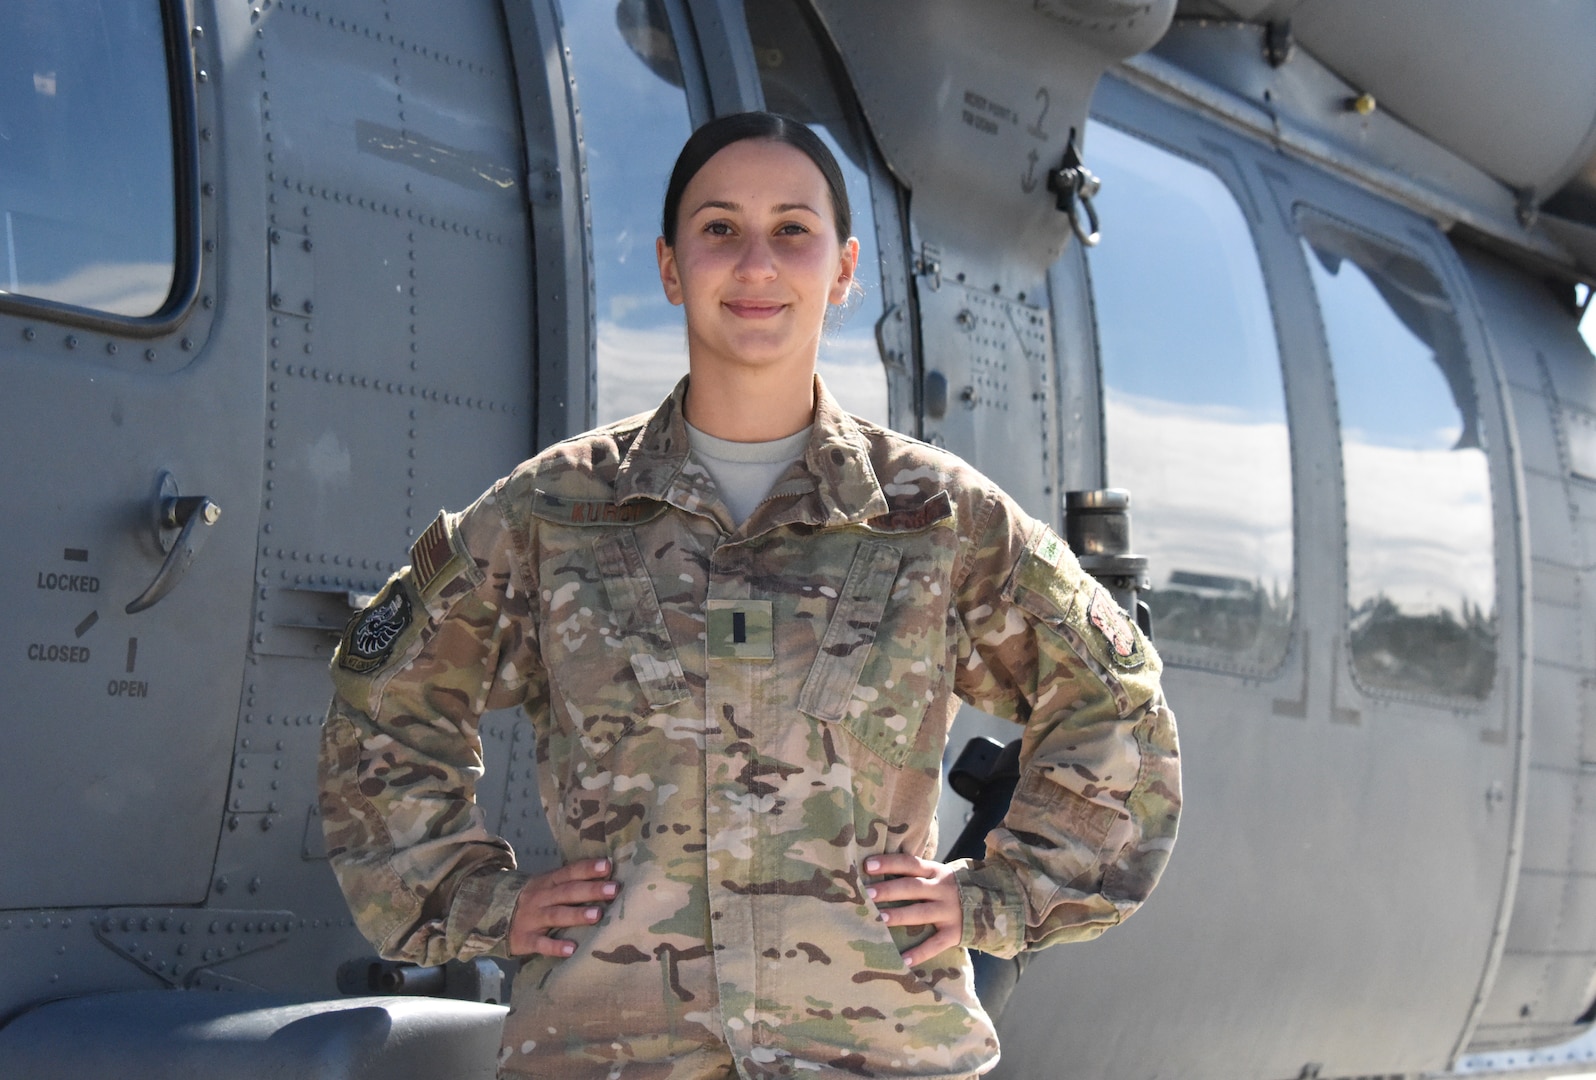 U.S. Air Force 1st Lt. Julie Kurdi, a maintenance officer assigned to the 106th Rescue Wing, New York Air National Guard, pose for a photo on the flight line at Francis S. Gabreski Air National Guard Base, Westhampton Beach, New York, Sept. 7, 2019. Kurdi spent 17 years enlisted in Security Forces before she commissioned in 2017. (U.S. Air National Guard photo by Airman 1st Class Kevin J. Donaldson)